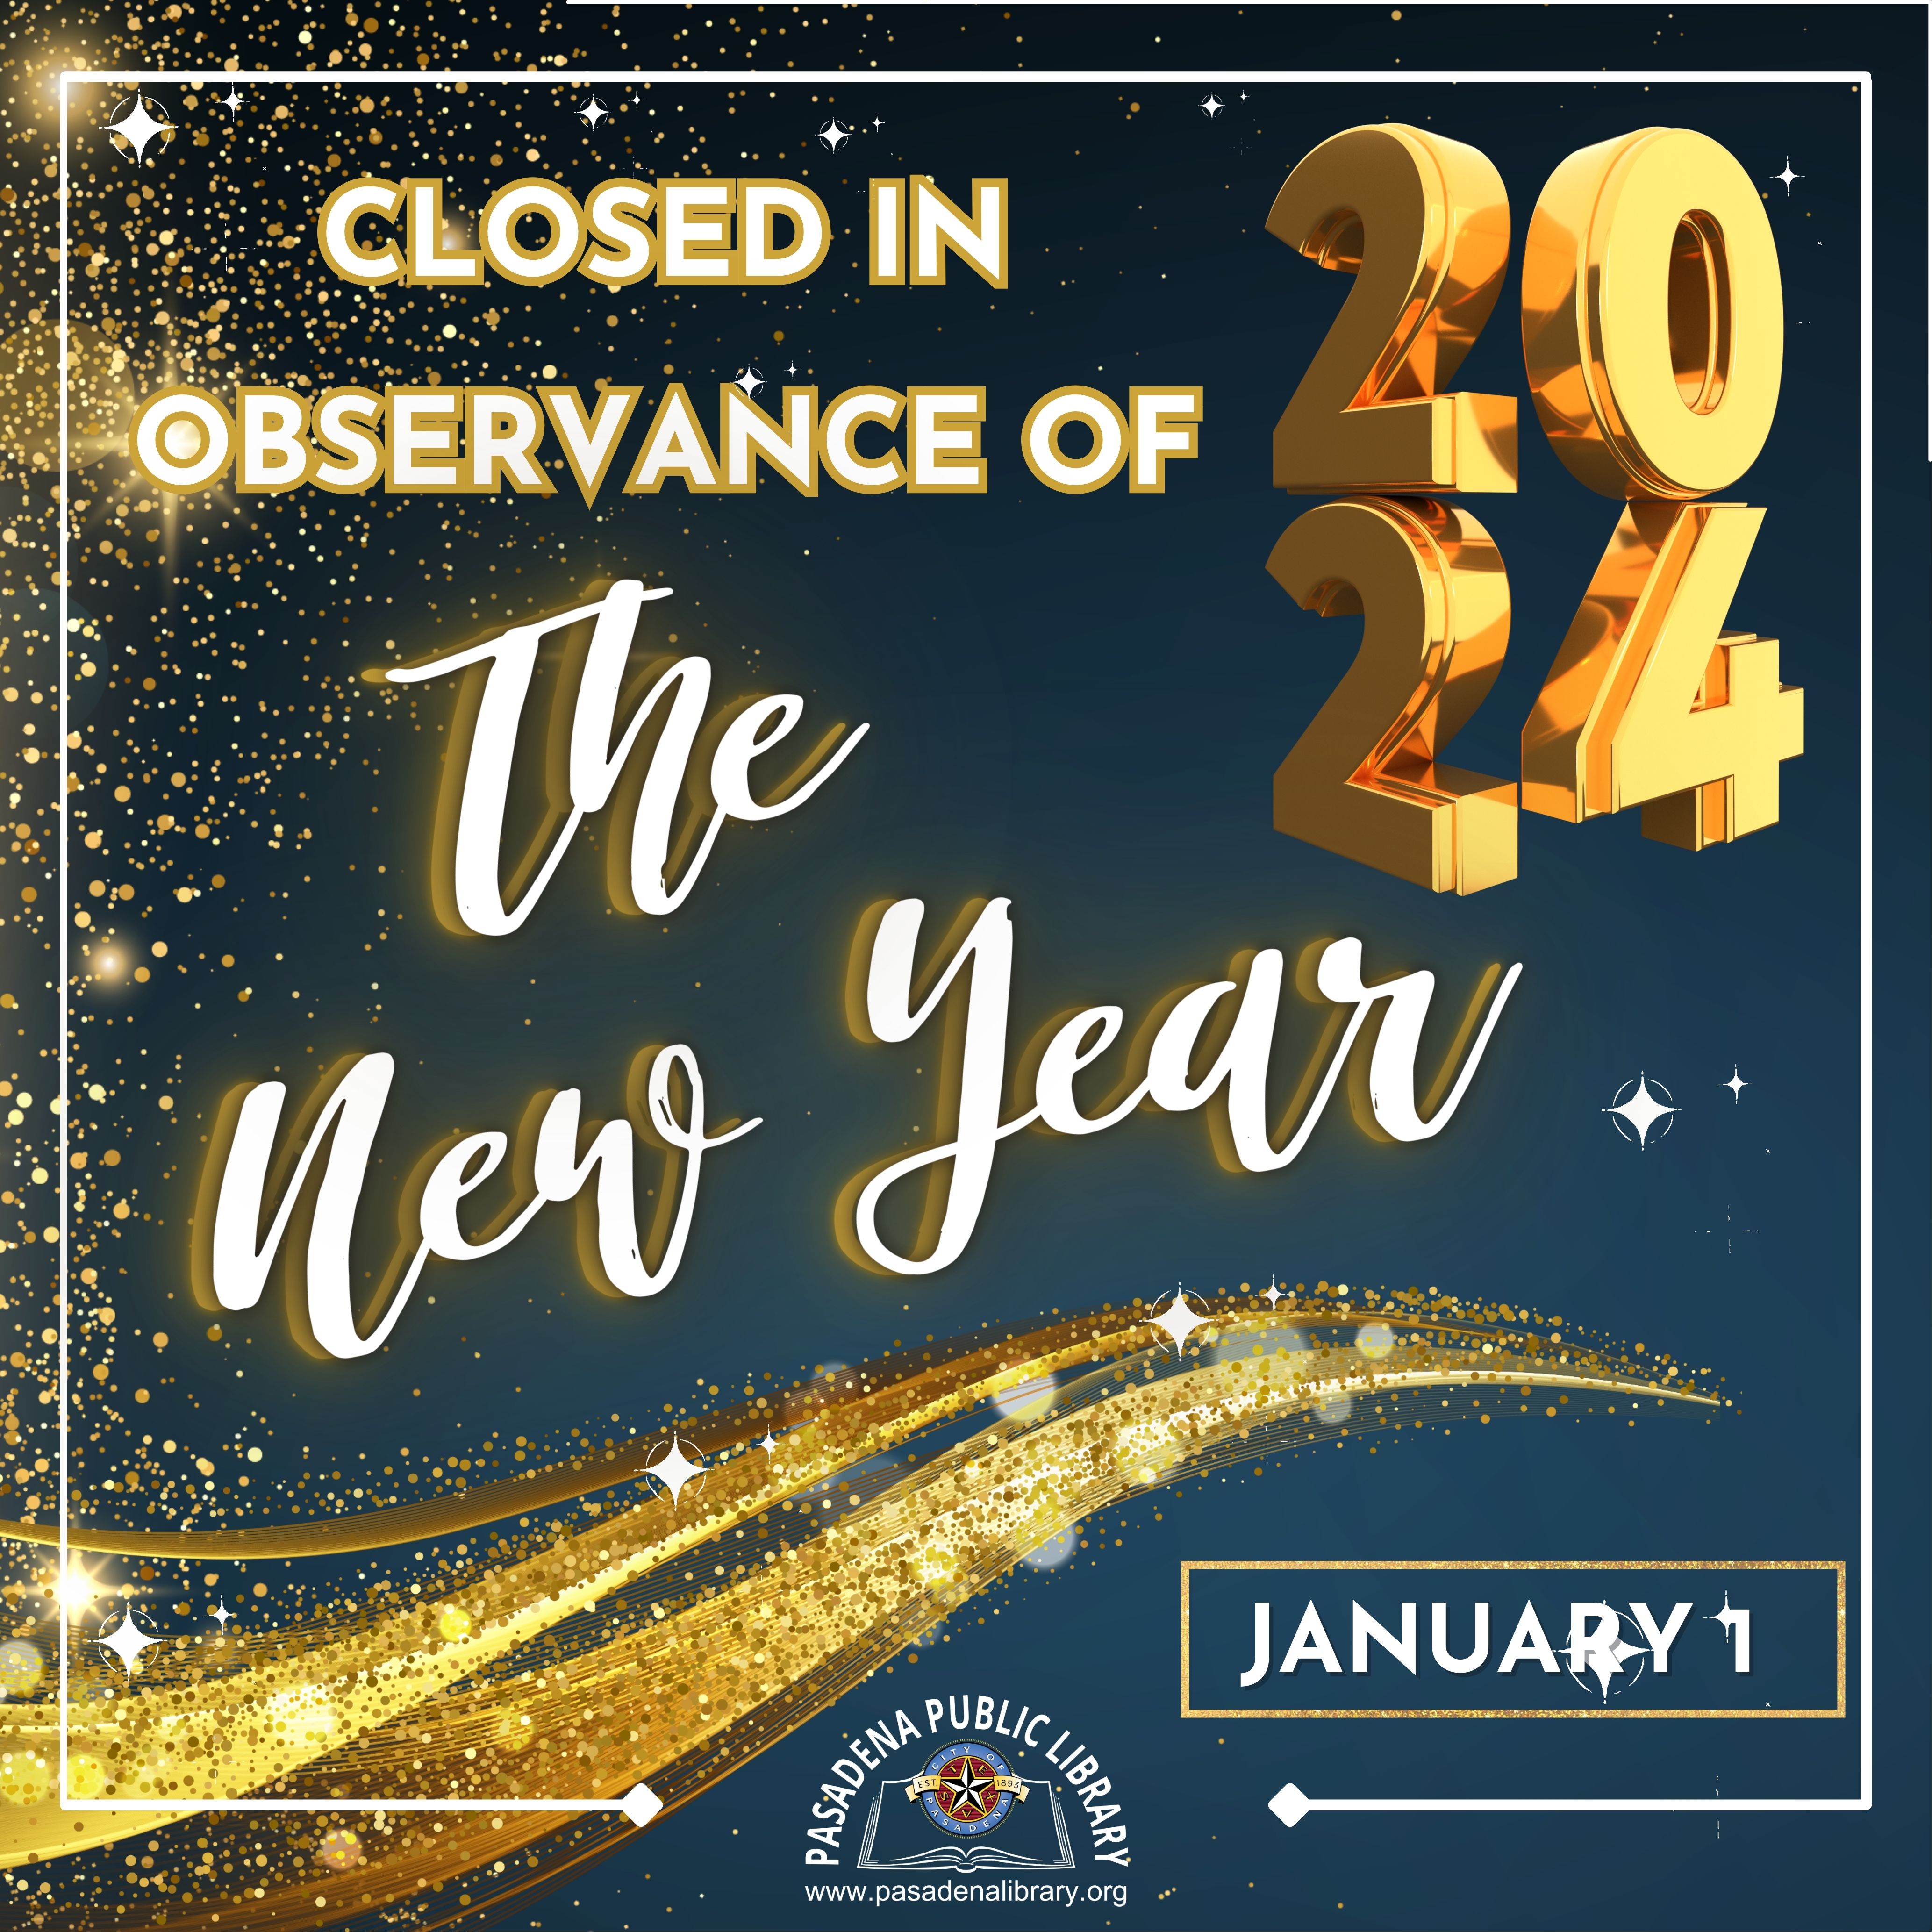 Closed in observance of The New Year